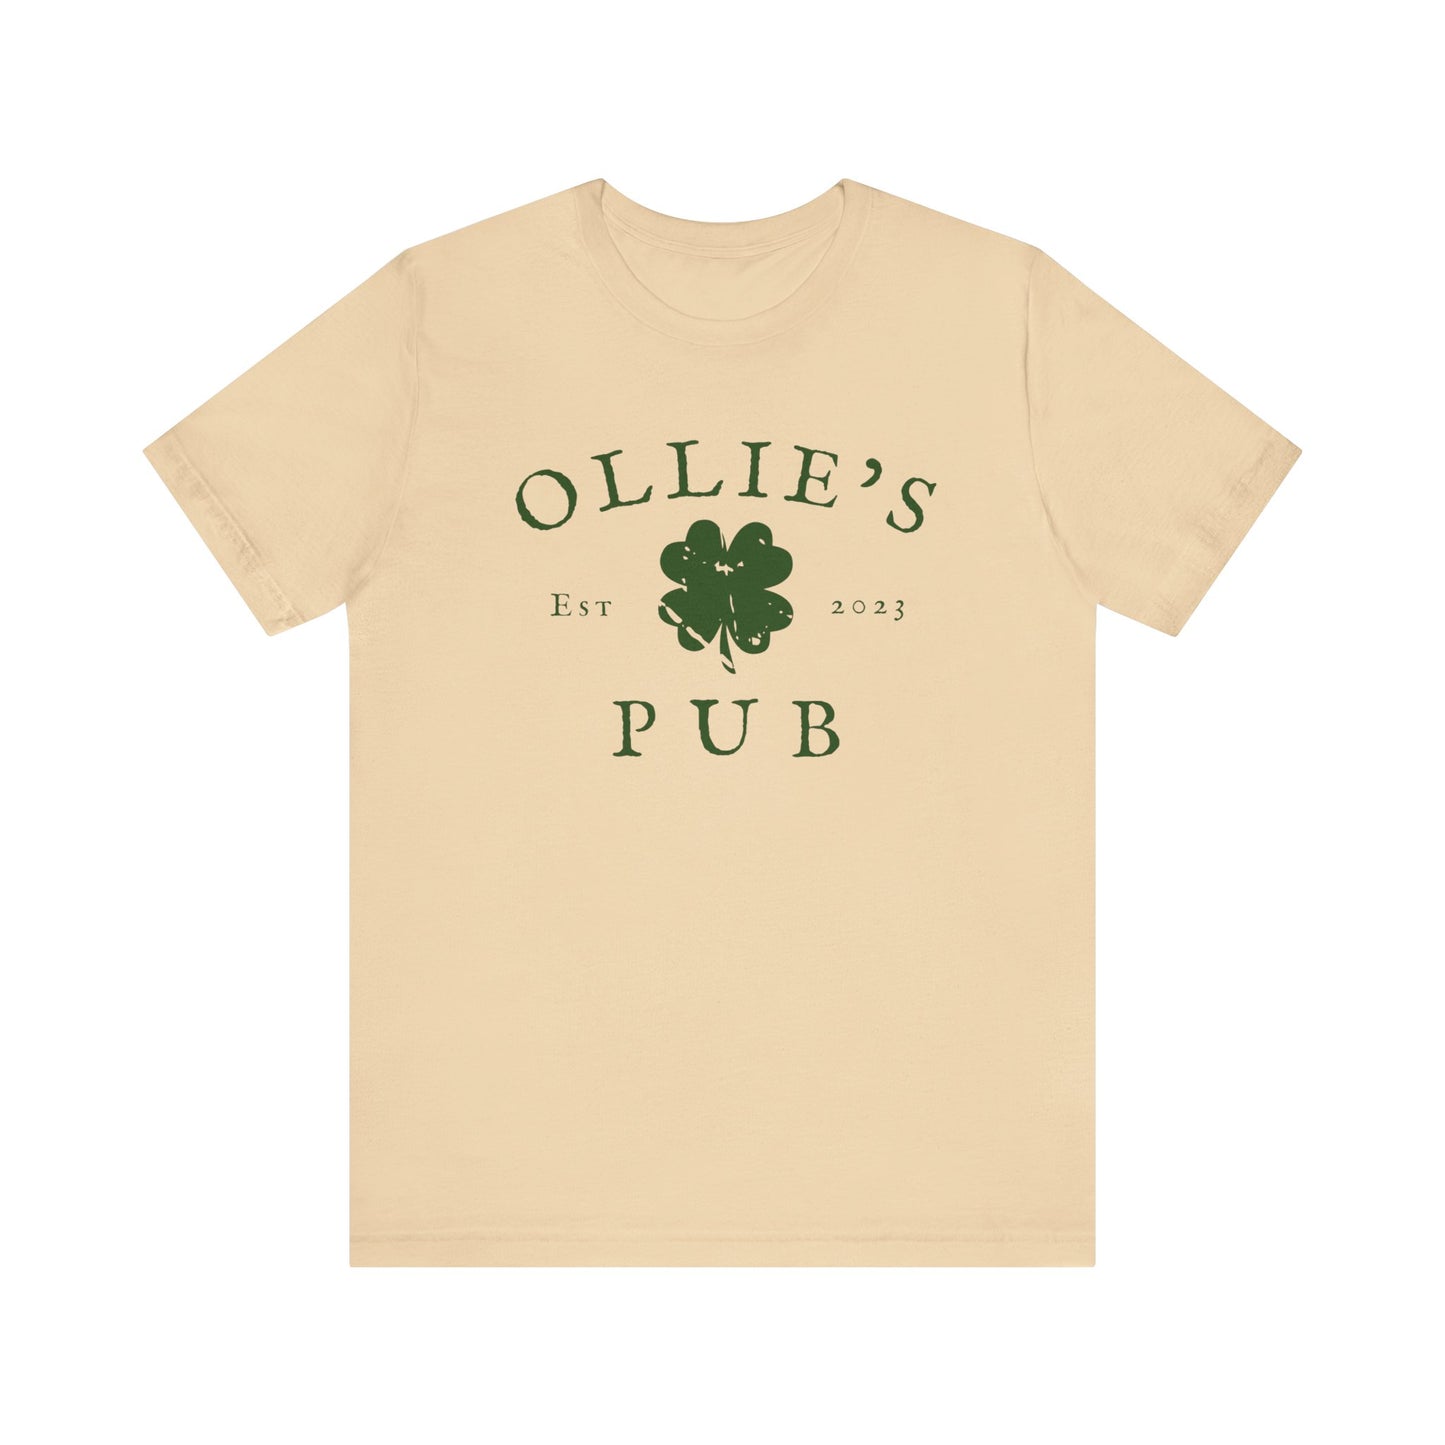 Ollie's Pub - St. Patrick's Day Shirt - Classic Unisex Jersey Tee - Soft Cotton - Perfect for Celebration